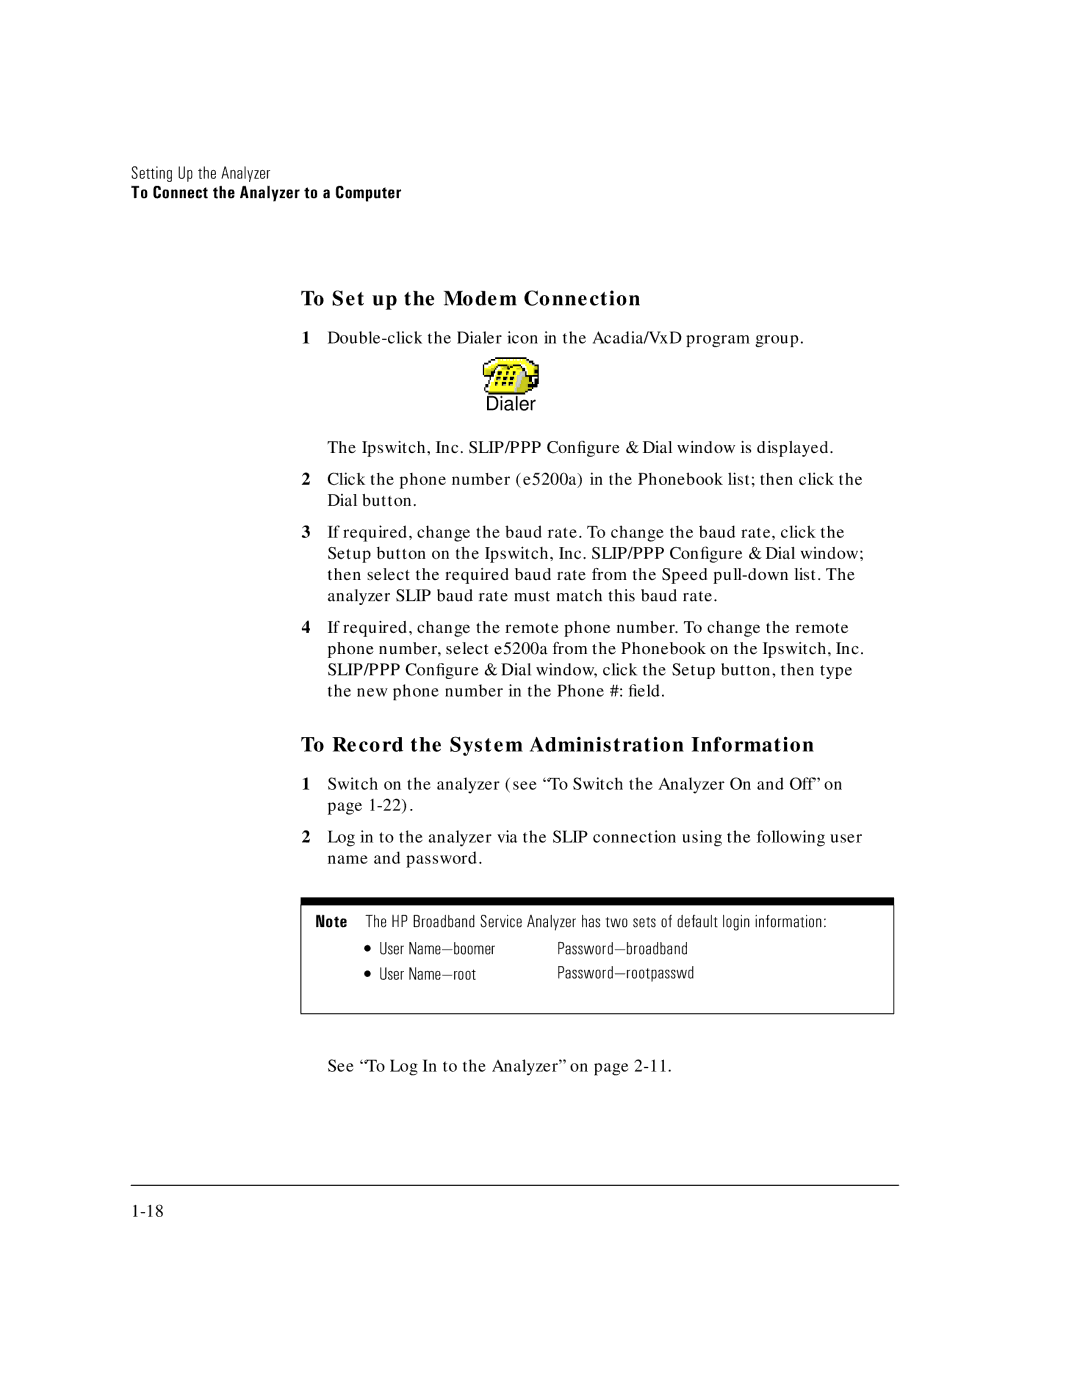 HP E5200A manual To Set up the Modem Connection, Dialer 